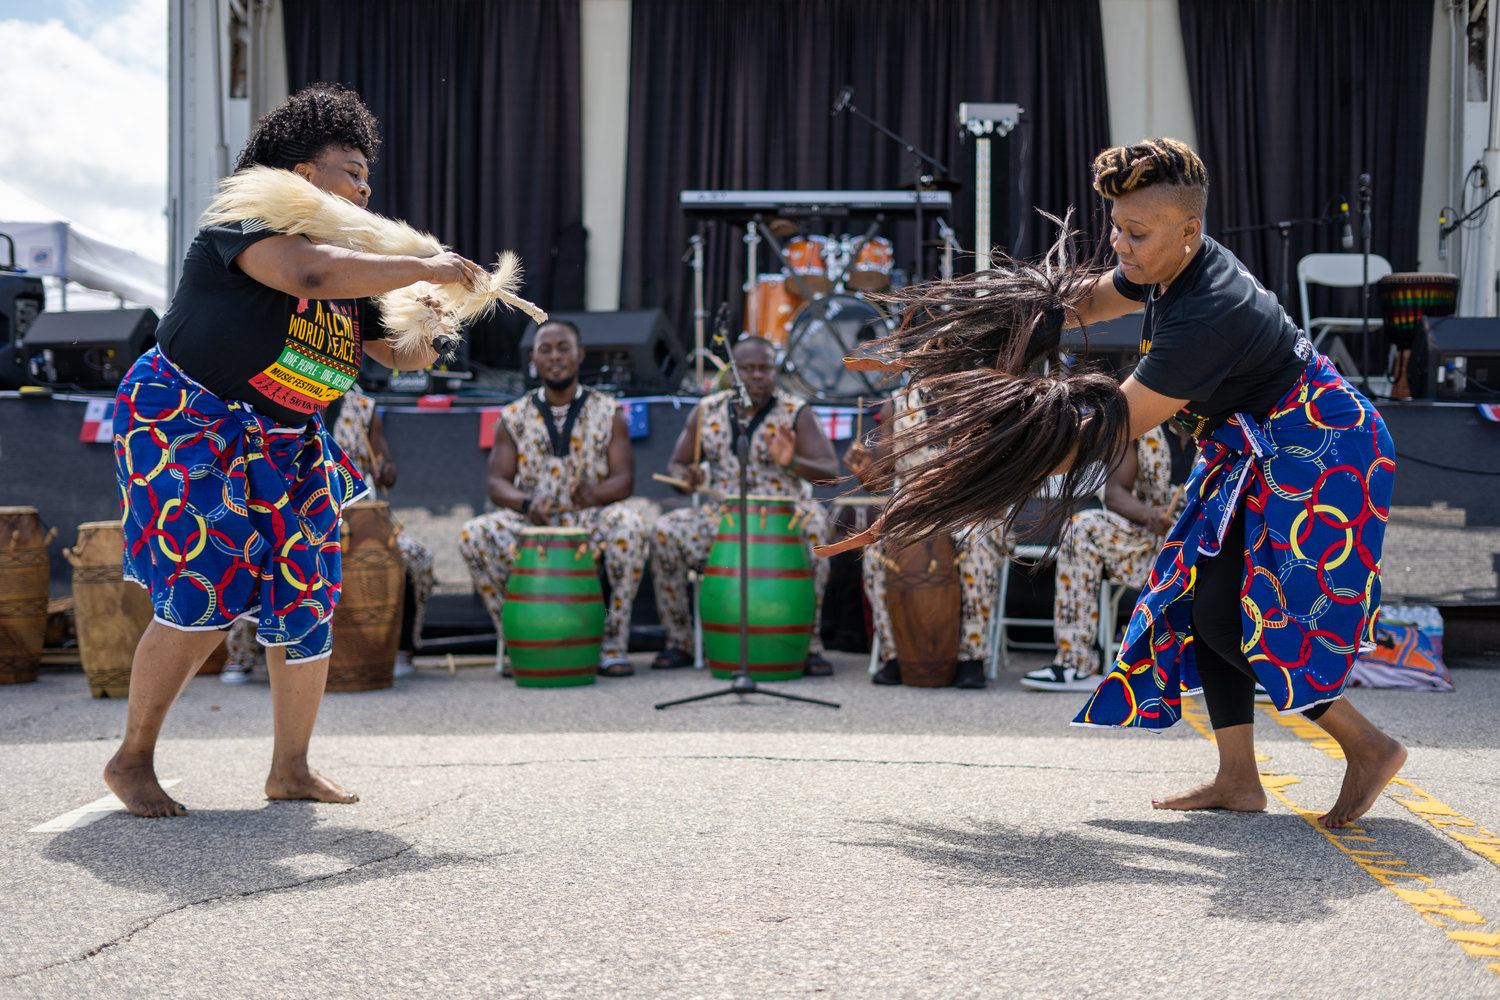 The Aya African Drum and Dance group performs.